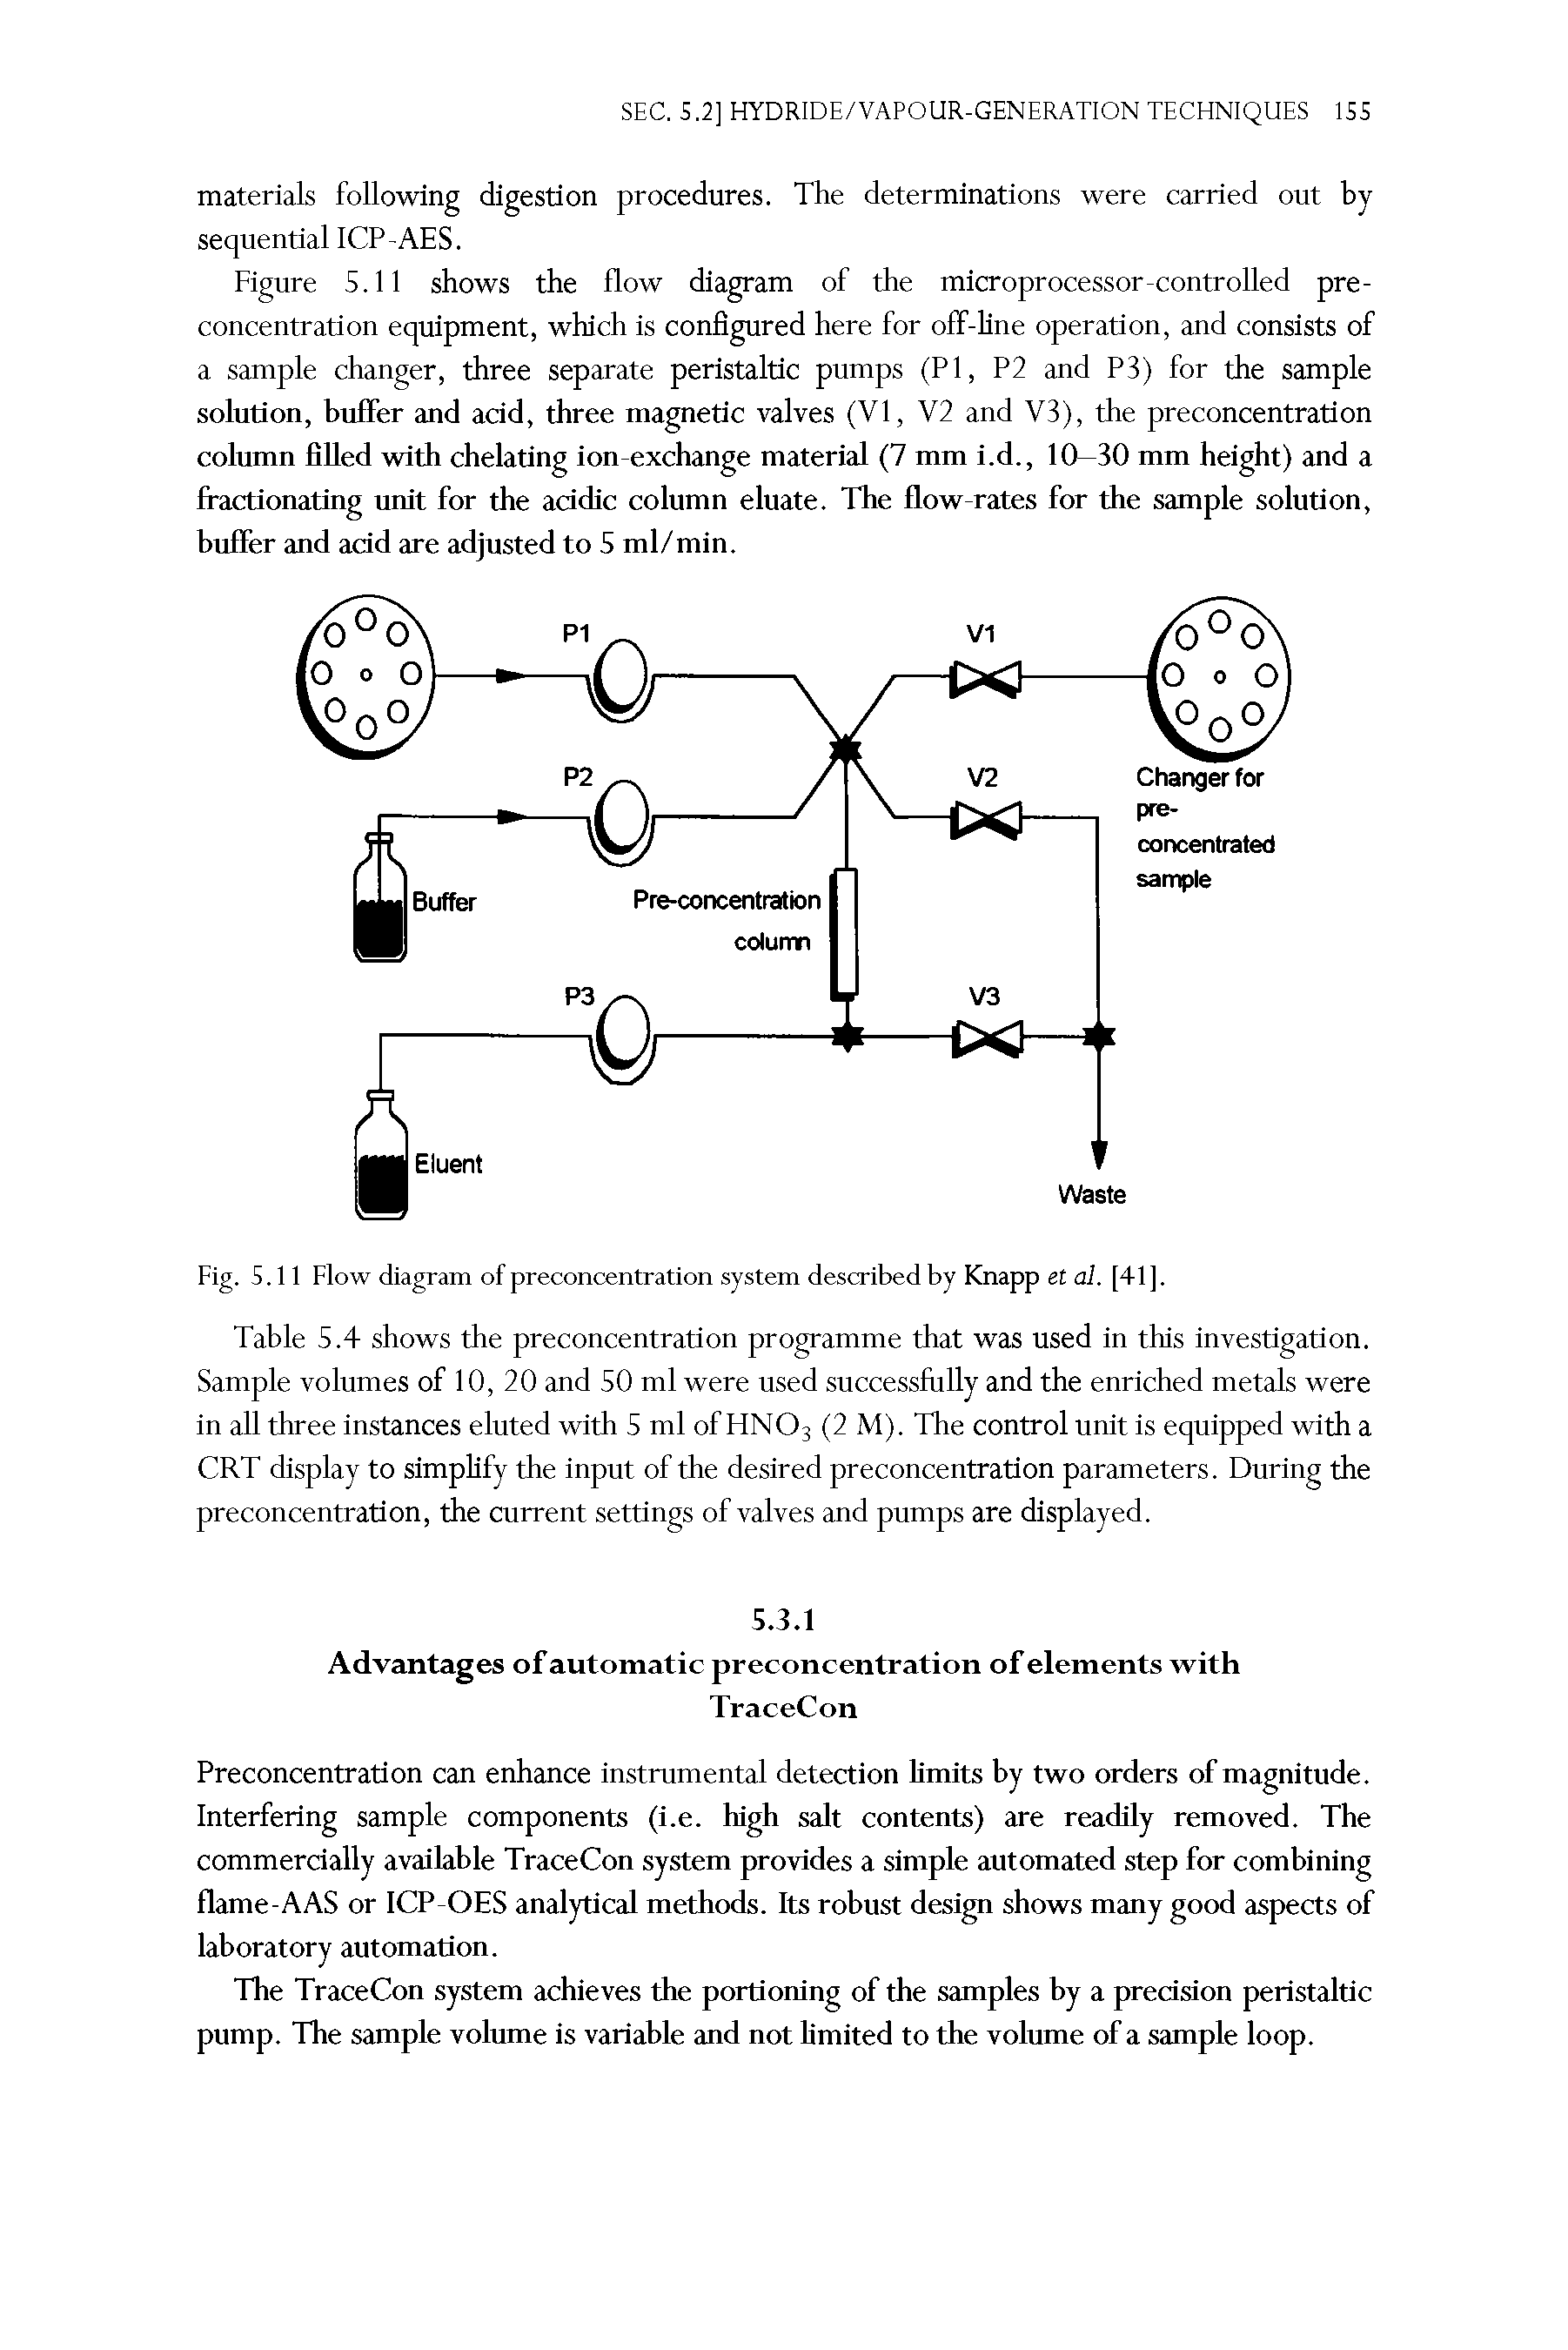 Figure S.ll shows the flow diagram of the microprocessor-controlled preconcentration equipment, which is configured here for off-line operation, and consists of a sample changer, three separate peristaltic pumps (PI, P2 and P3) for the sample solution, buffer and add, three magnetic valves (VI, V2 and V3), the preconcentration column filled with chelating ion-exchange material (7 mm i.d., 10—30 mm height) and a fractionating unit for the addic column eluate. The flow-rates for the sample solution, buffer and add are adjusted to S ml/min.